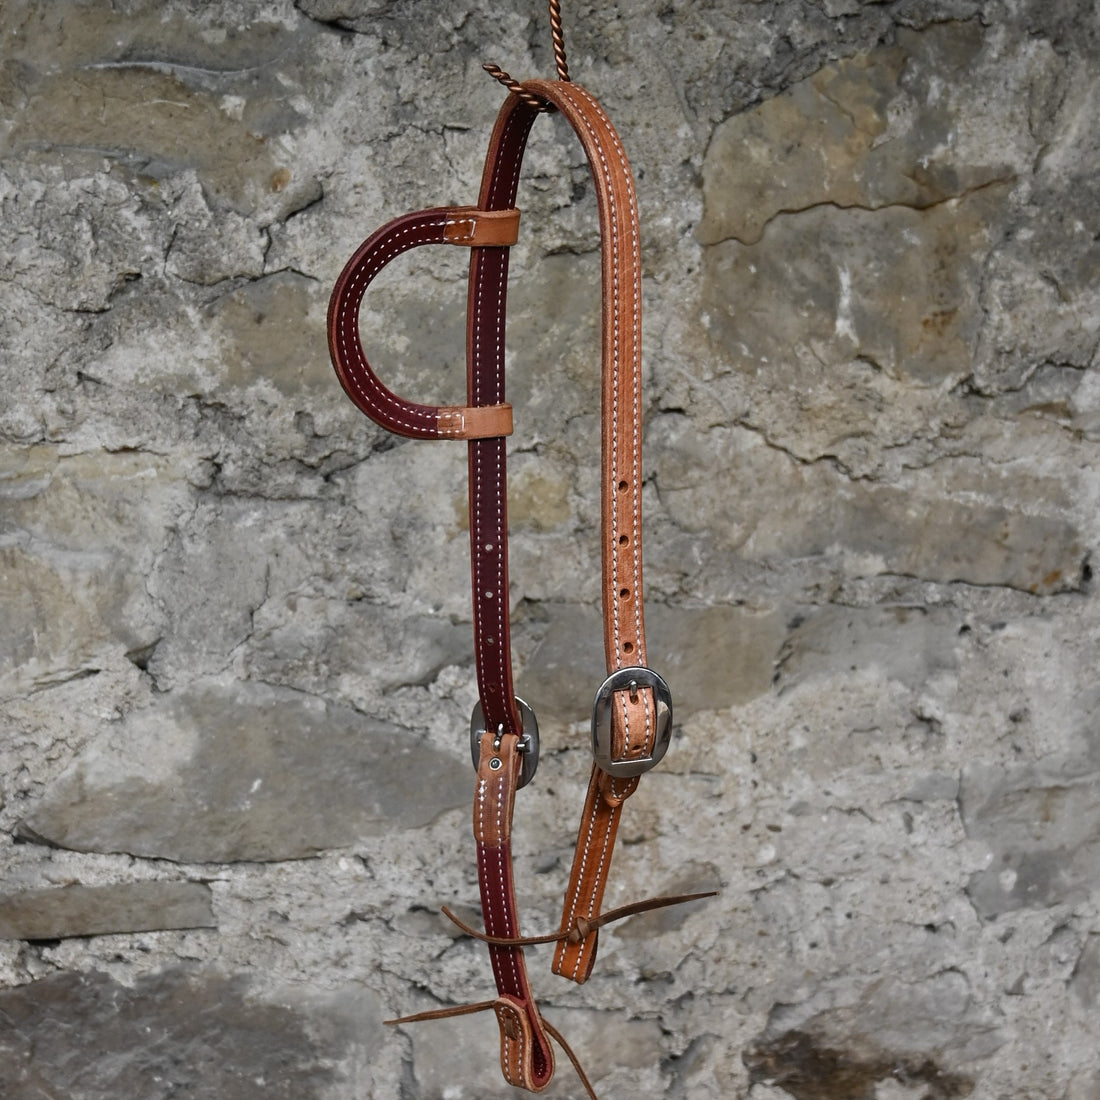 Berlin Custom Leather Double Stitched Sliding Ear Headstall view of headstall